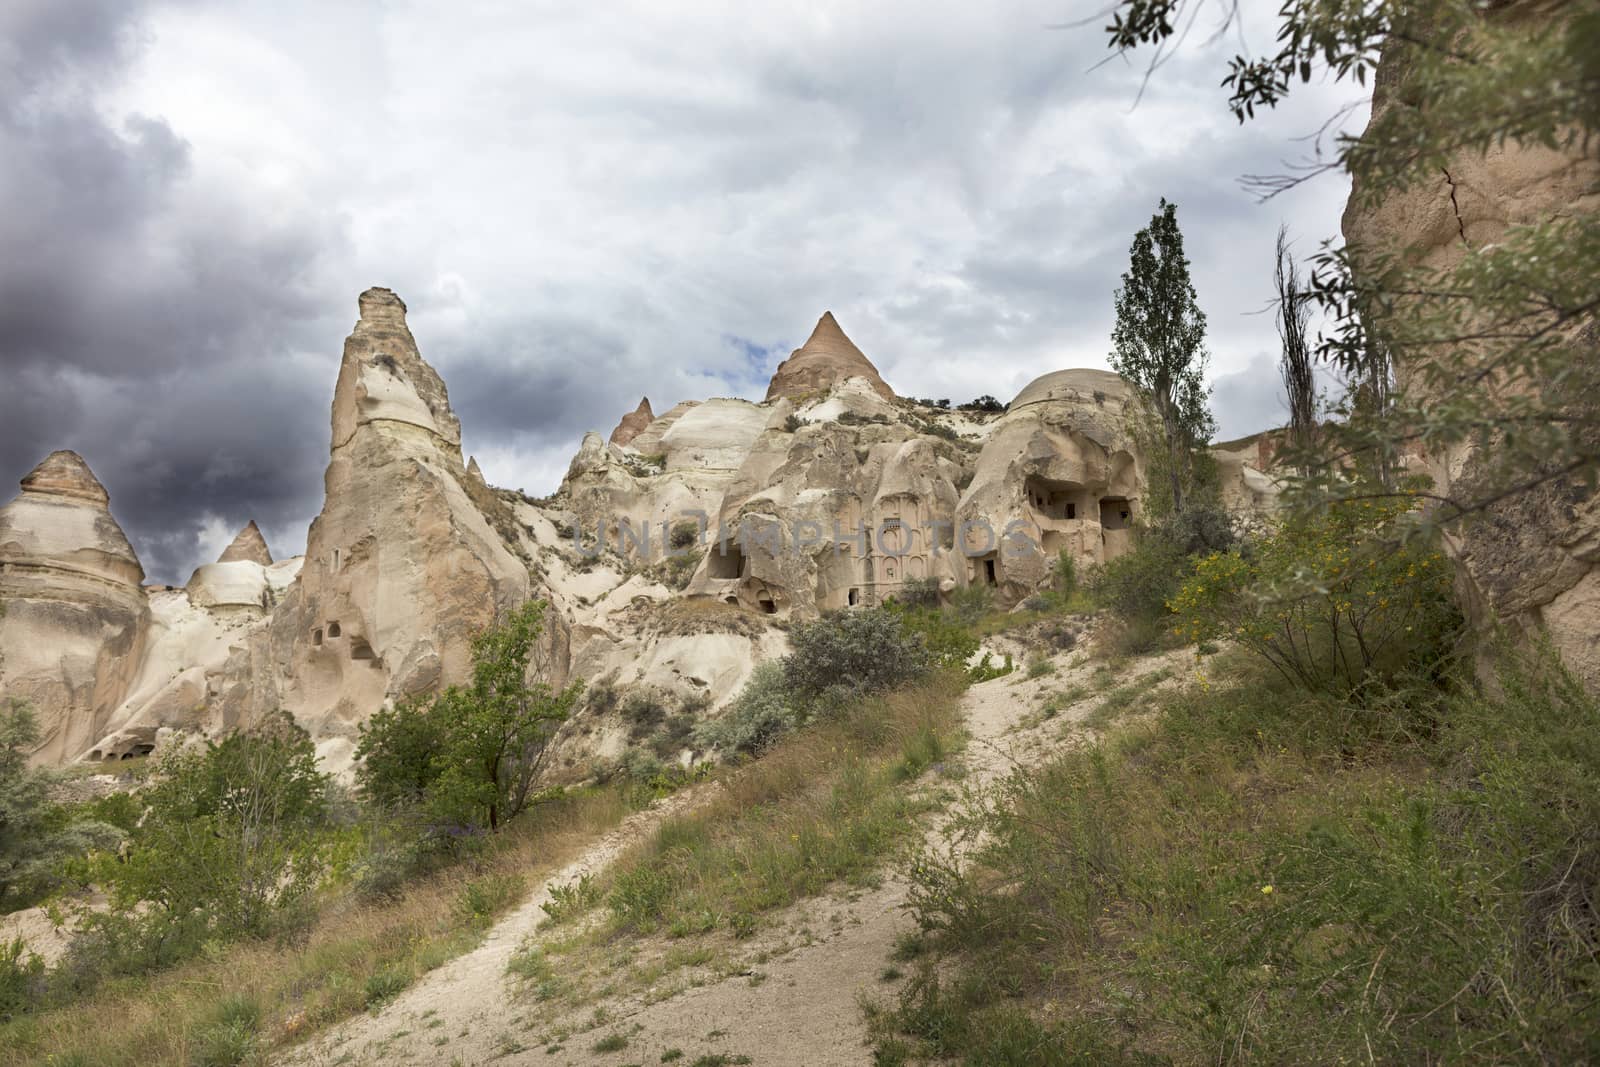 Abandoned caves in the Cappadocia mountains against the blue sky